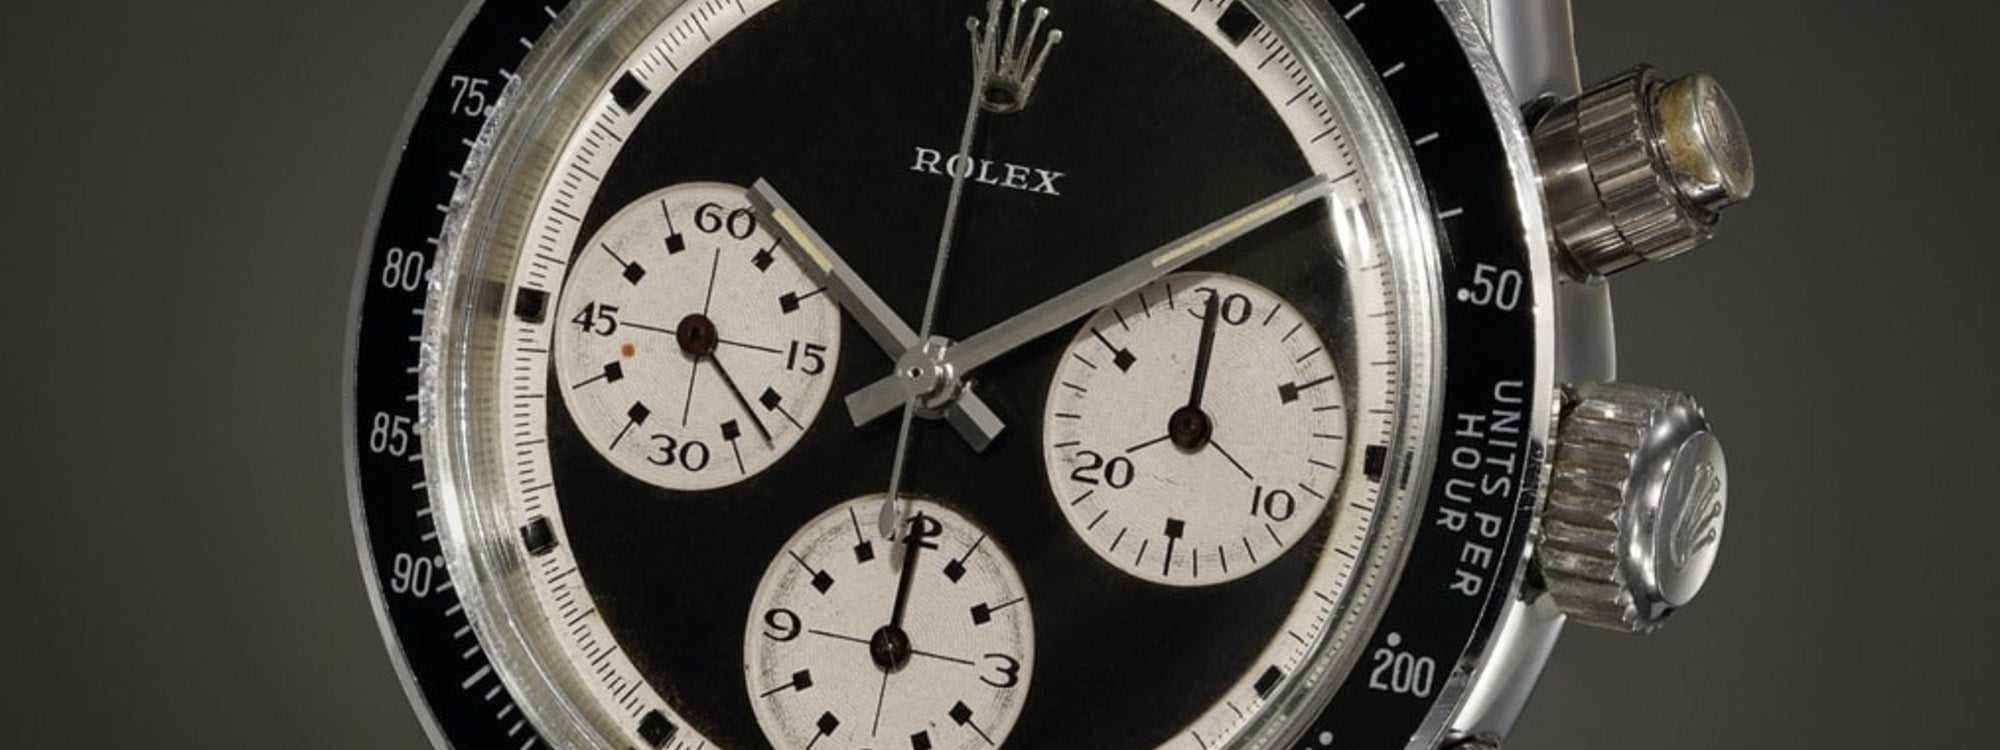 The Most Expensive Rolex Watches Ever Sold at Auction: Counting Down the Top 10